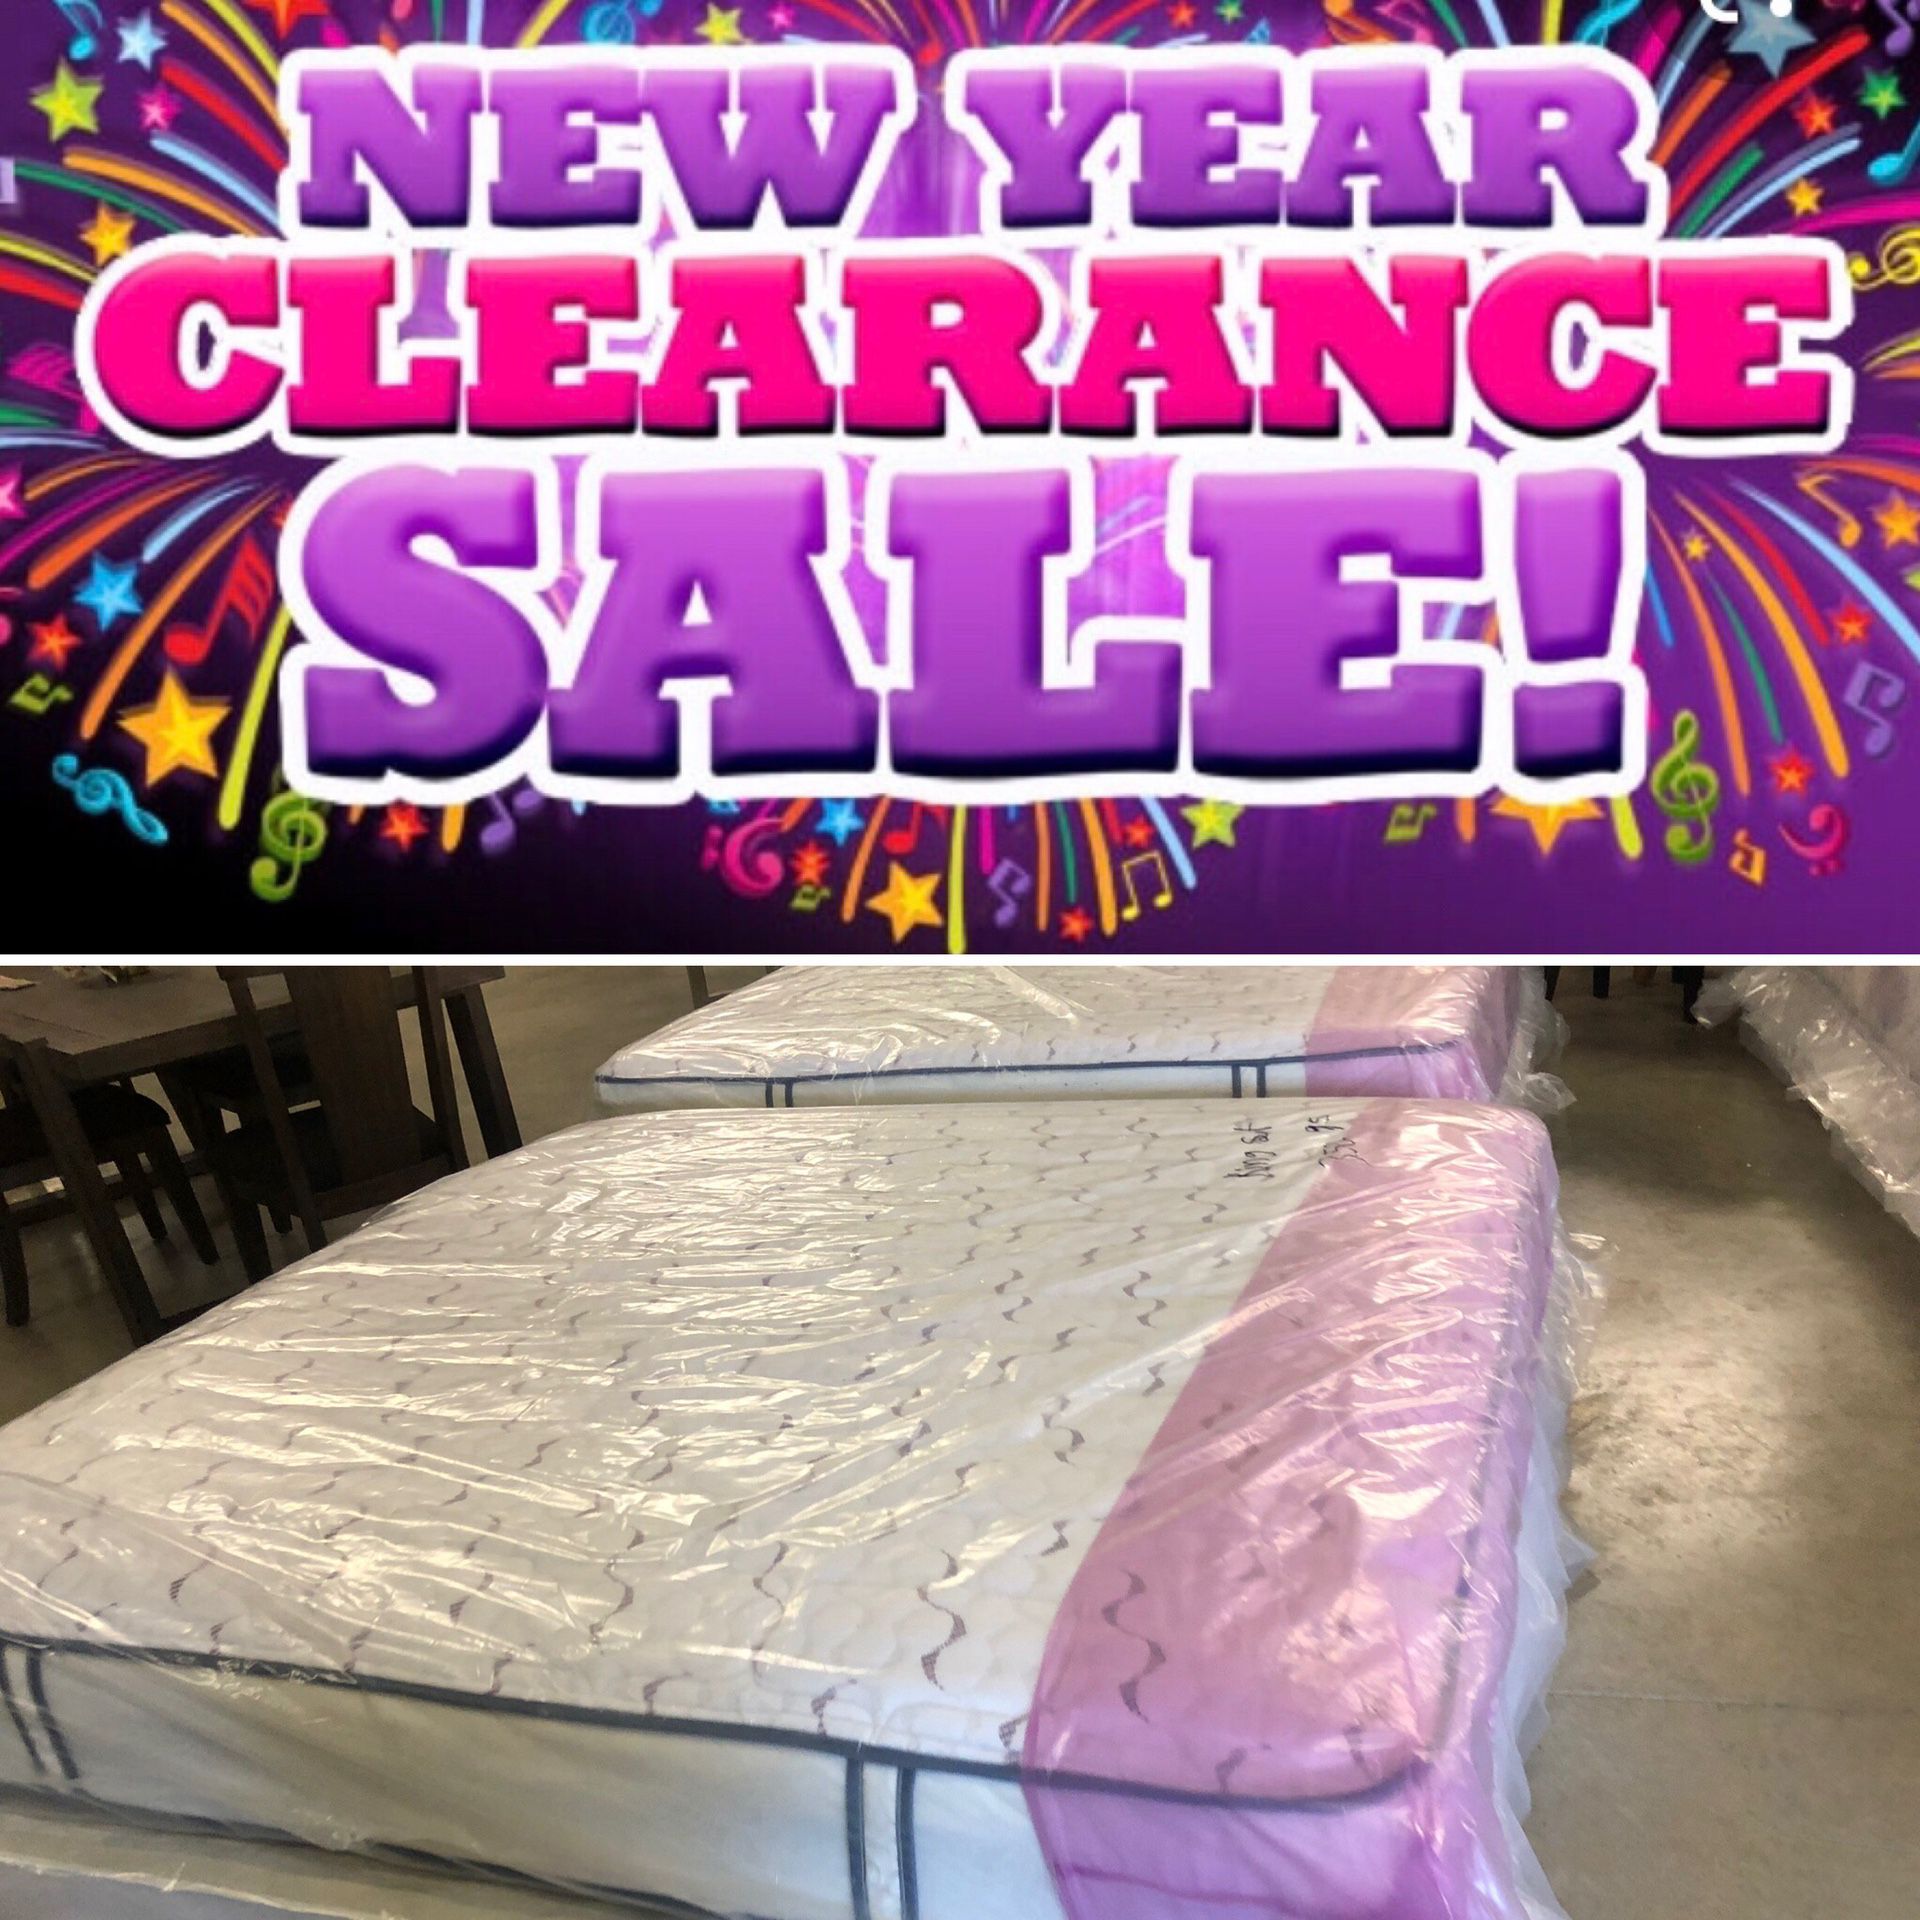 Big sale furniture. 12/26 /19. To 12/31/19. Mattress king size only $350.95. Twin size $169. Queen $250